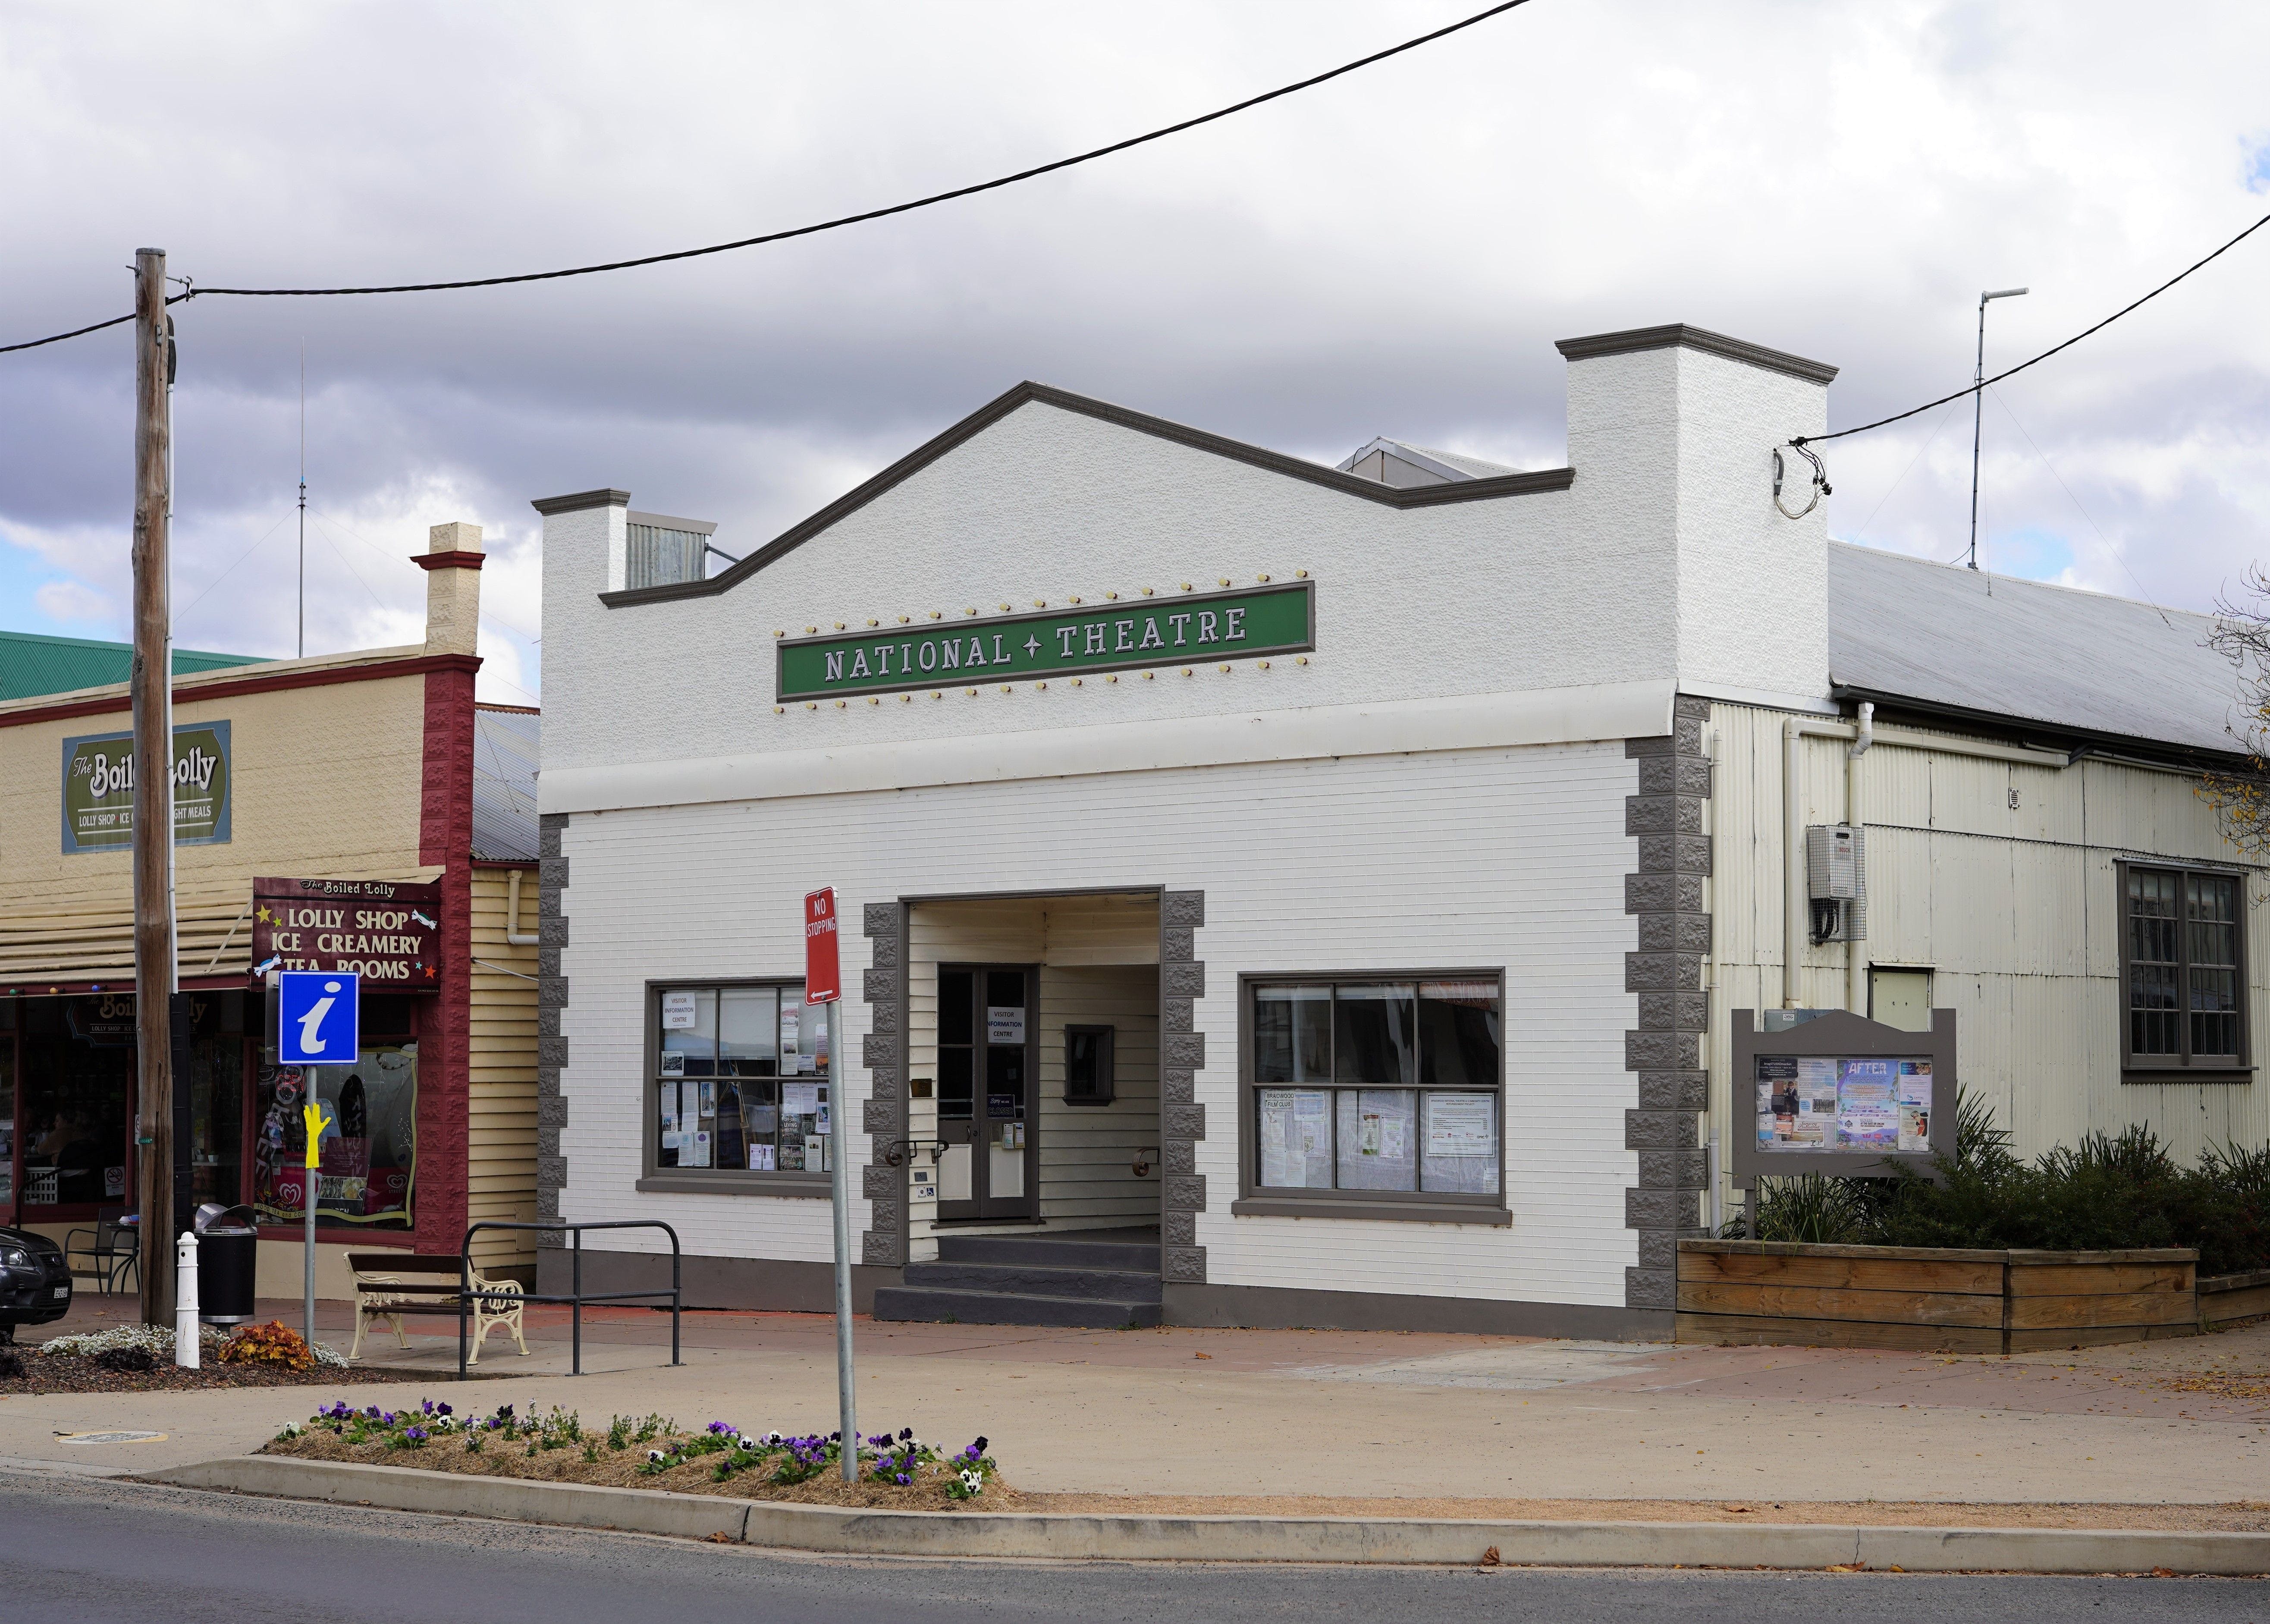 Braidwood Visitors Information Centre at the Theatre - Accommodation in Brisbane